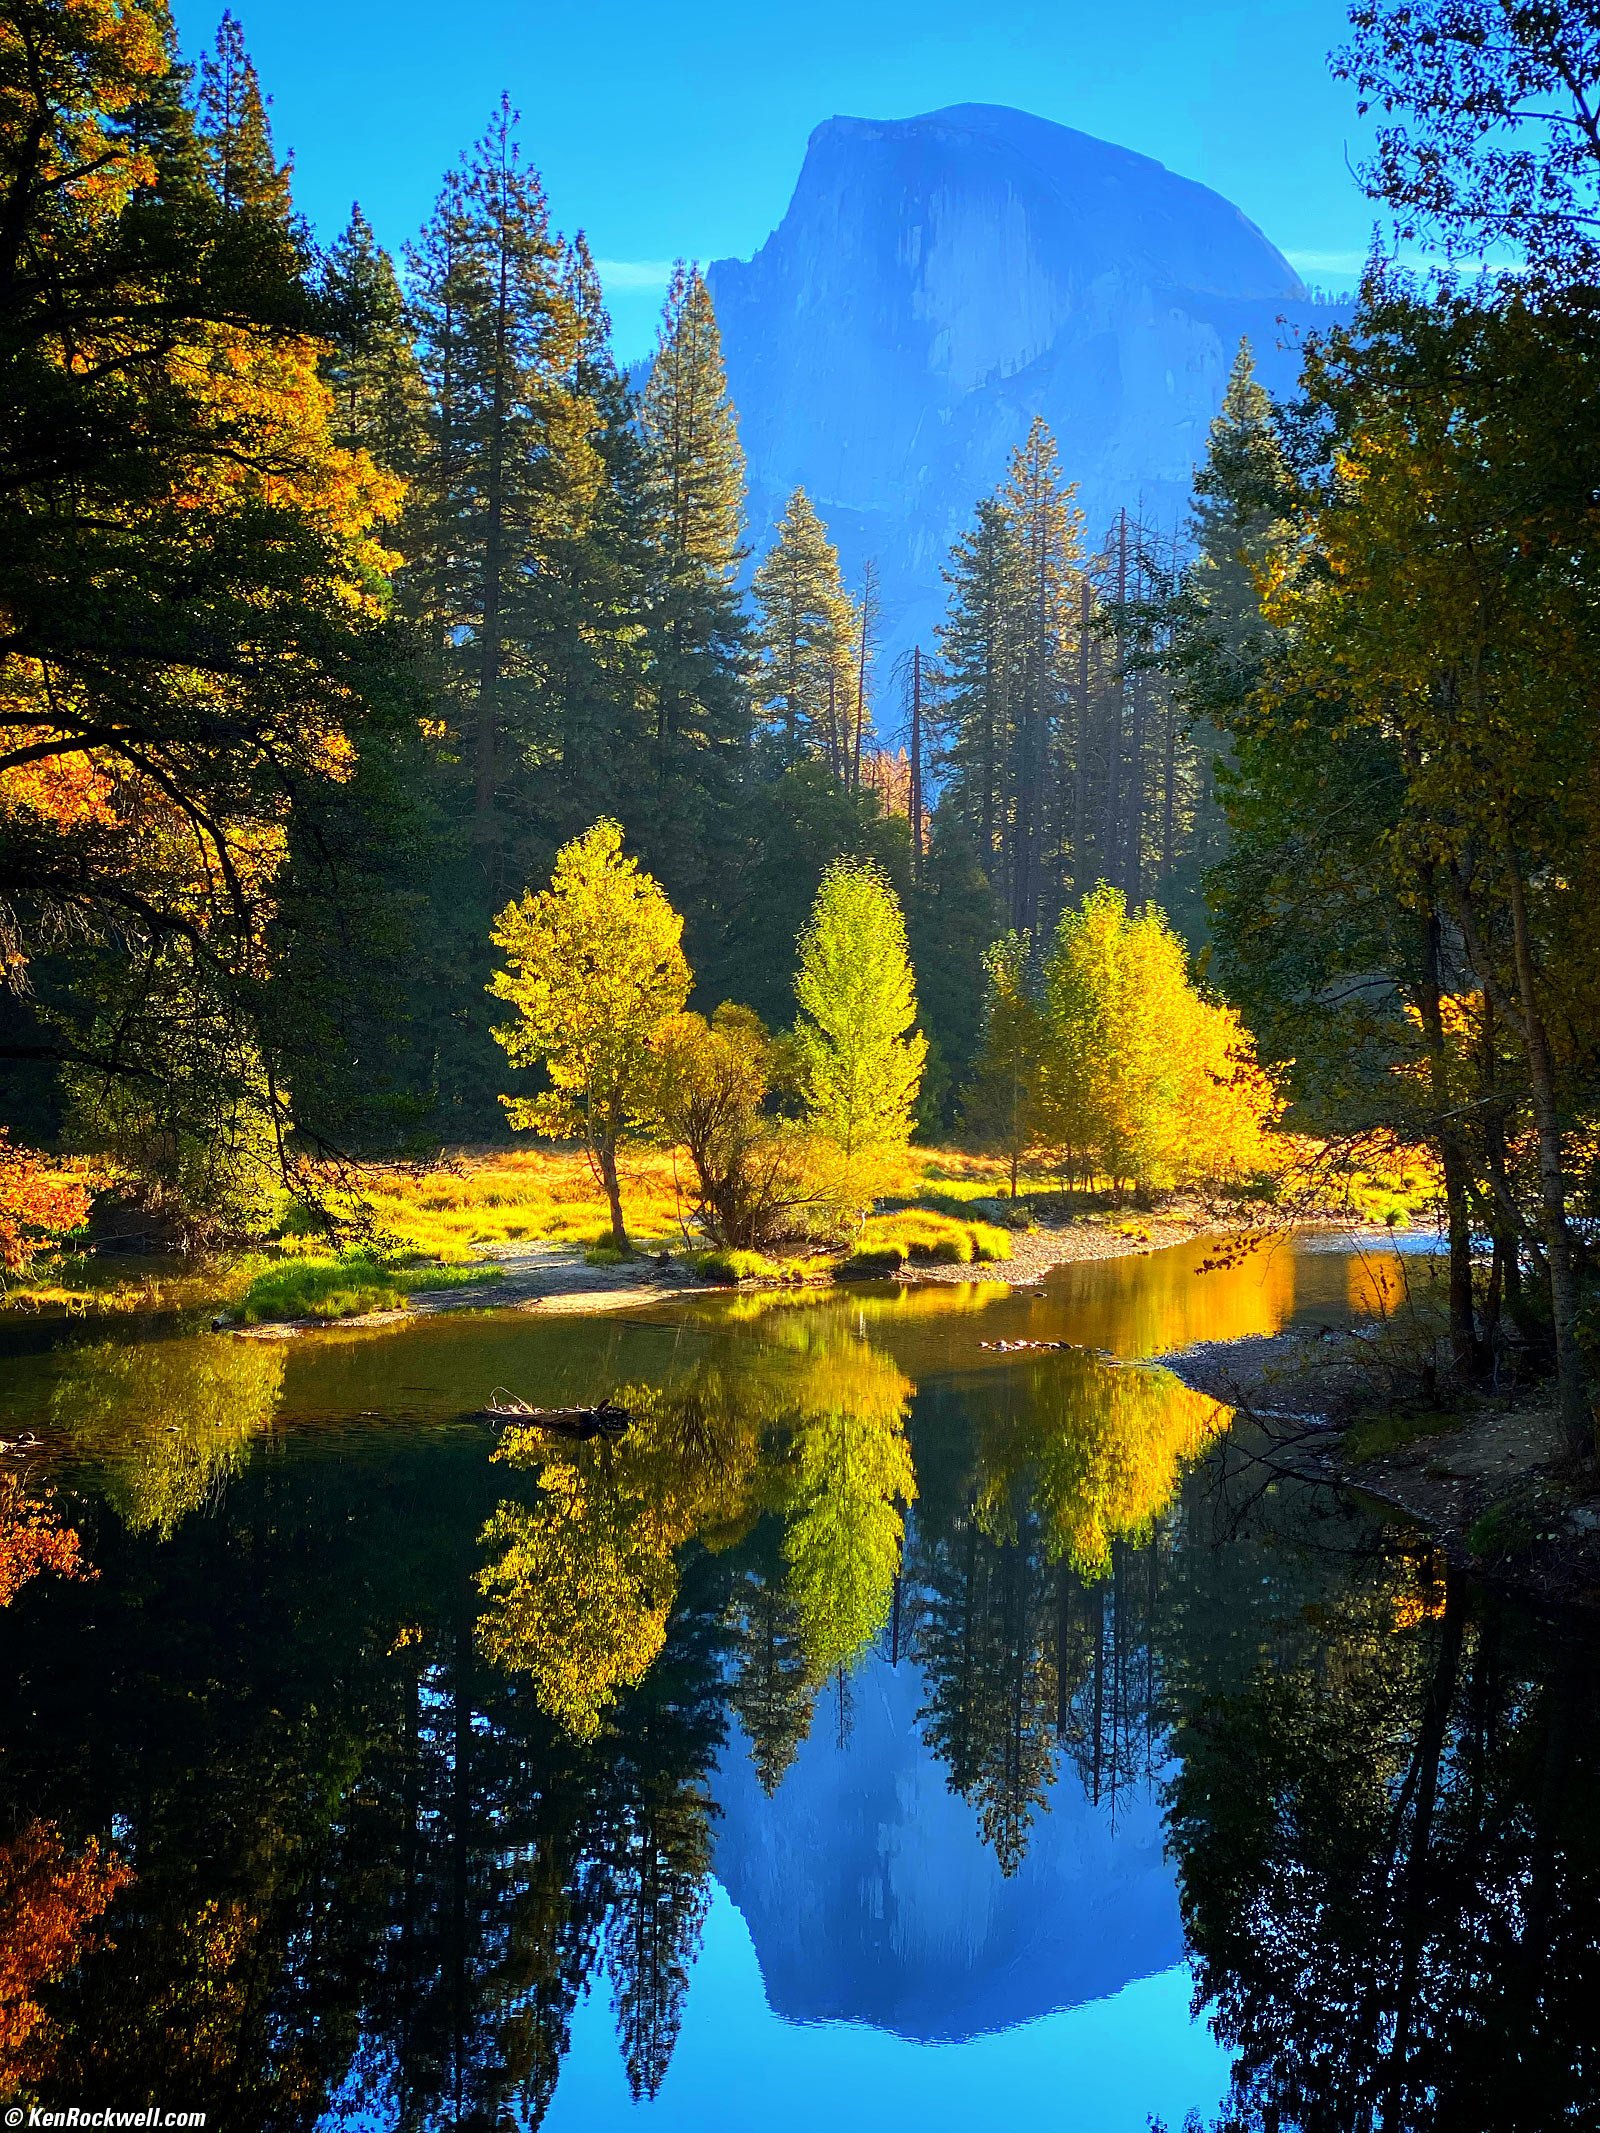 Side-Lit Yellow Trees with the Half Dome along the Banks of the Merced River, Yosemite Valley, Yosemite National Park, California